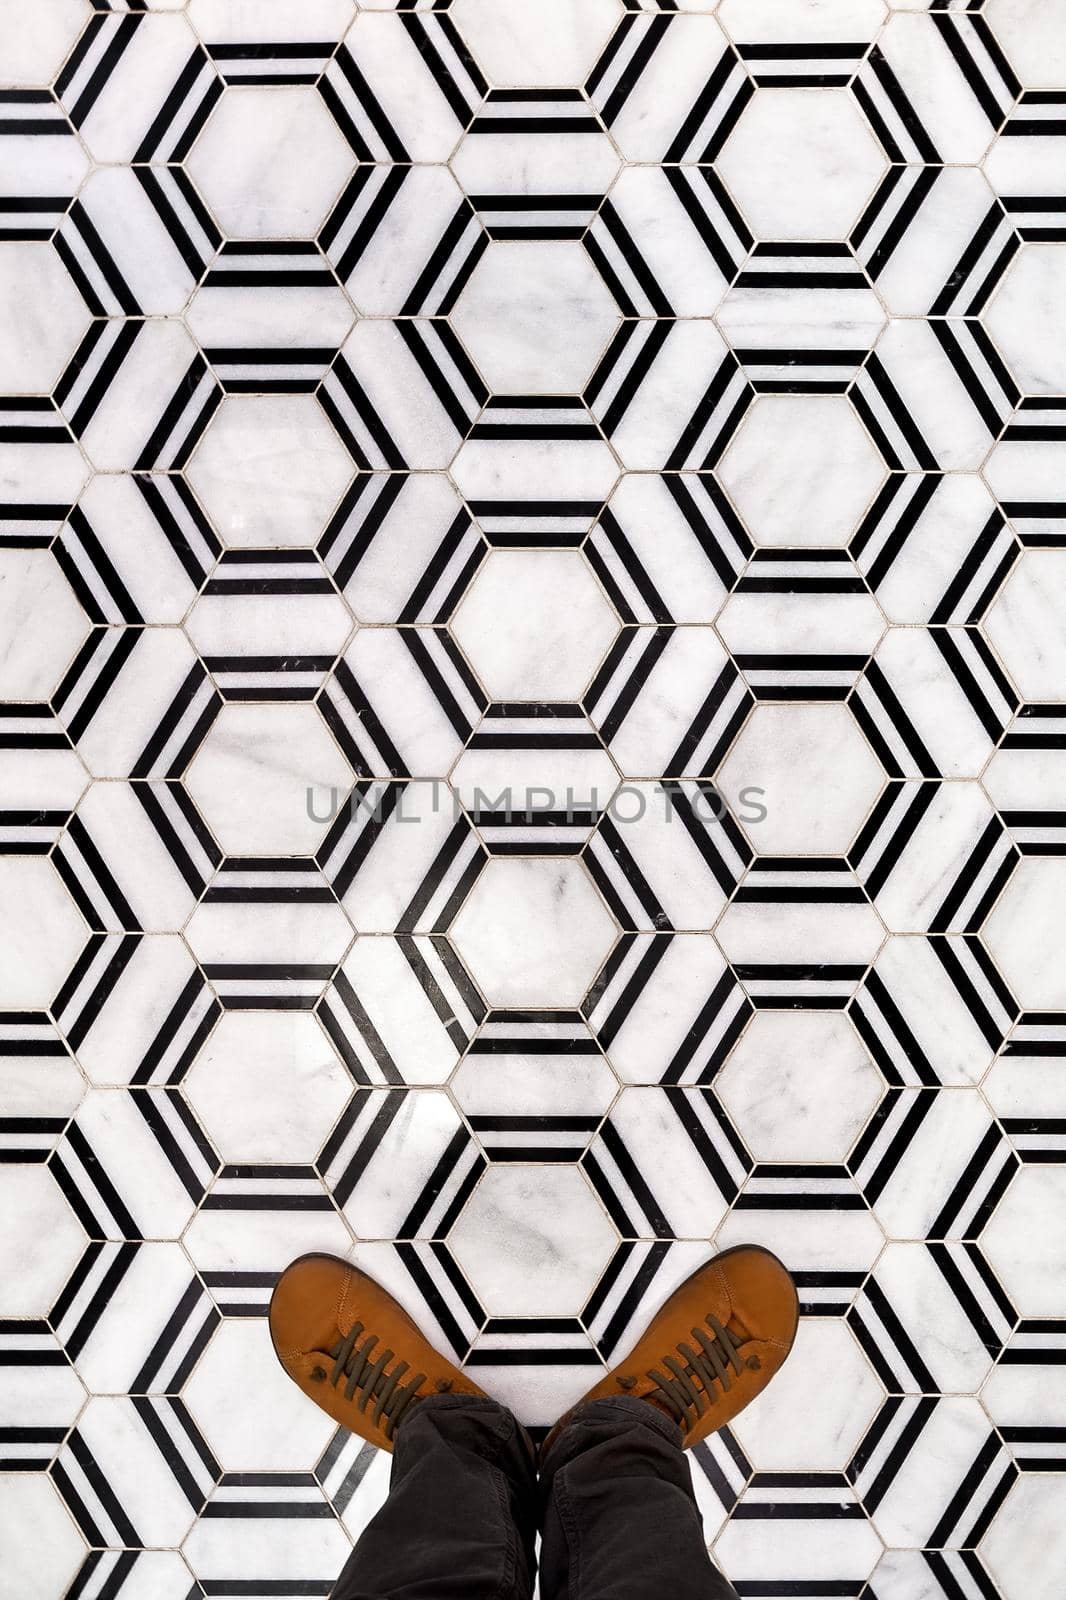 Top view of men's legs in black jeans wear brown leather shoes, standing on black and white hexagon floor tiles.